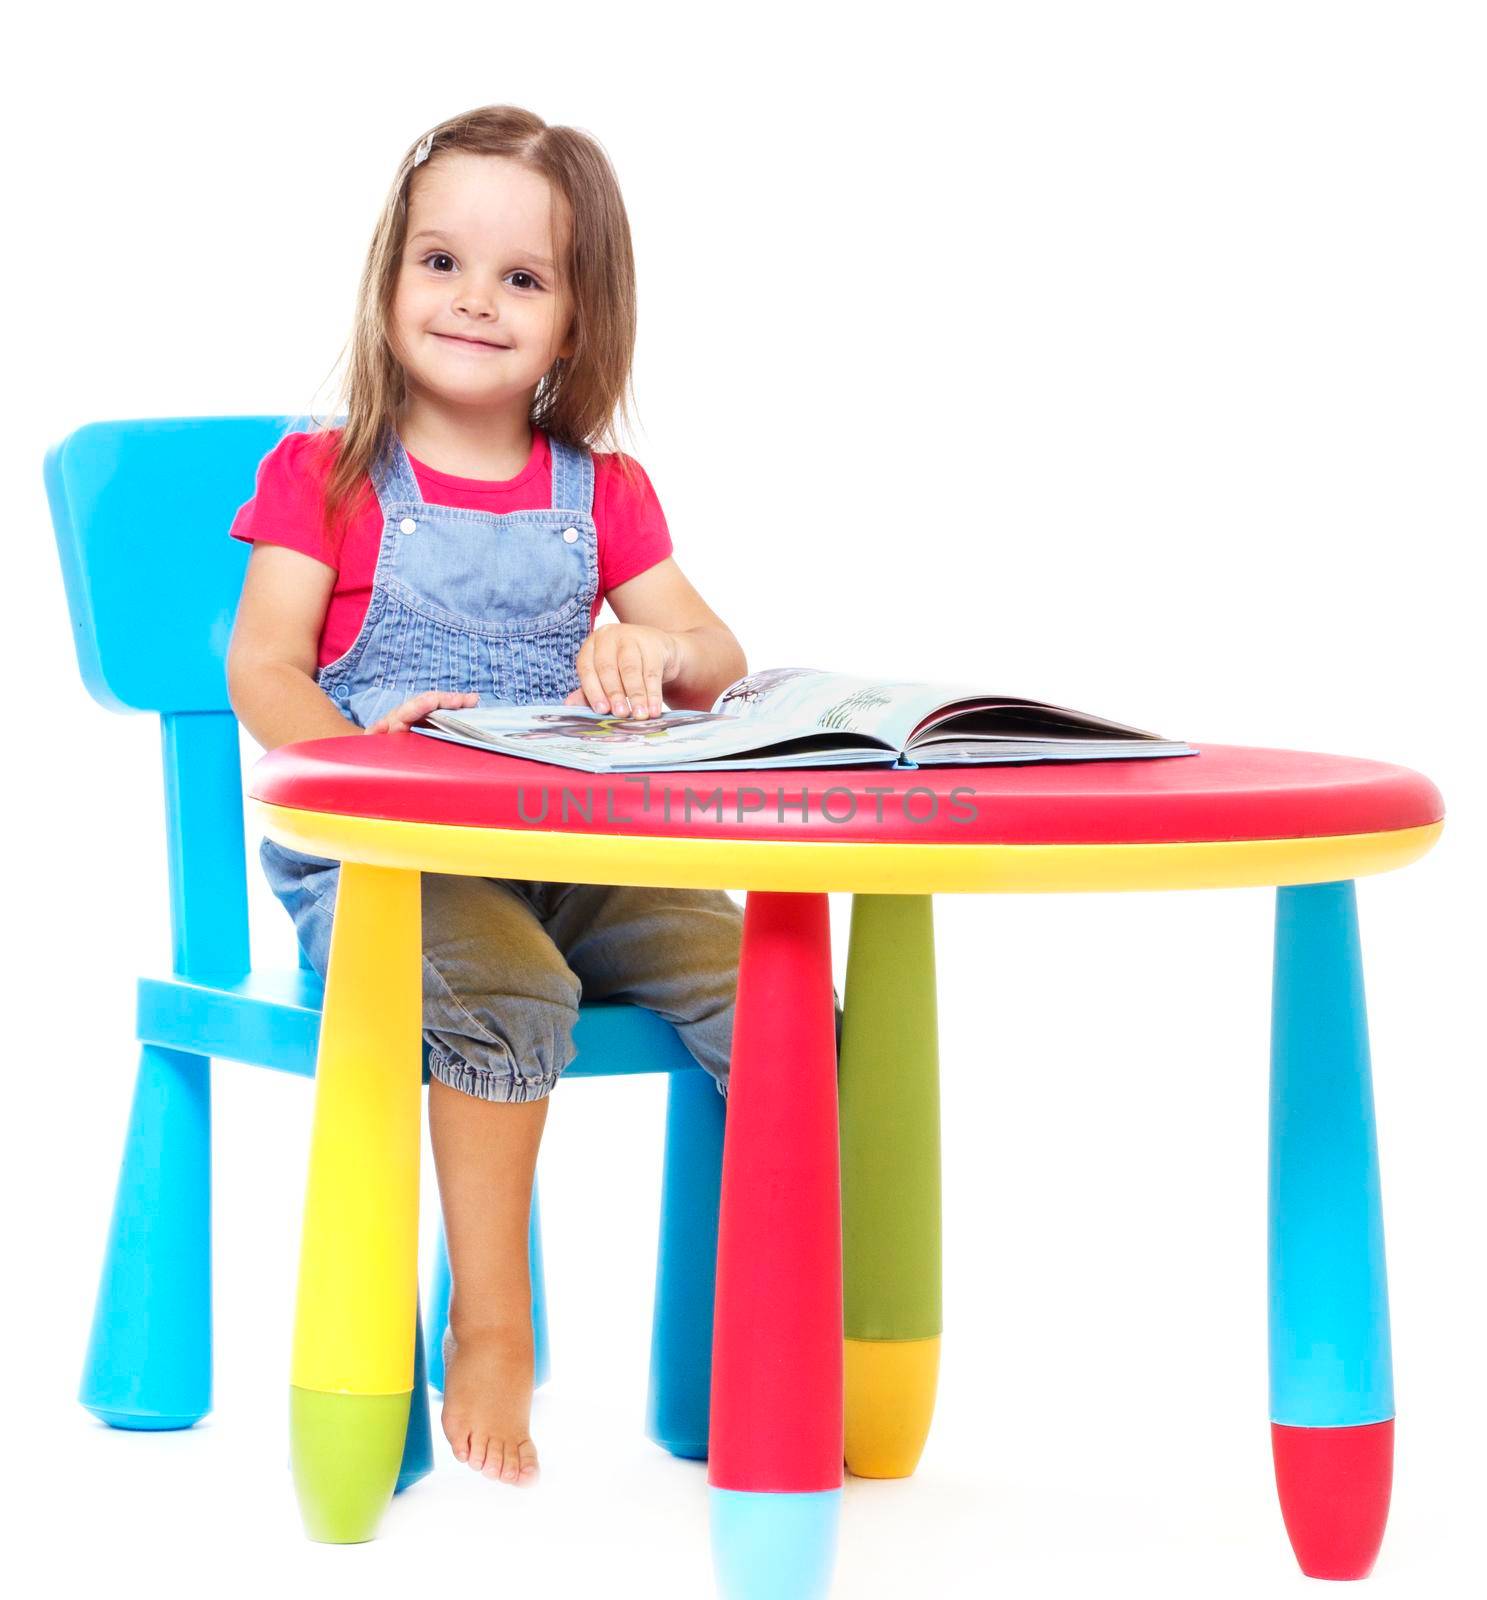 Child sitting at the table and reading a book by Jyliana